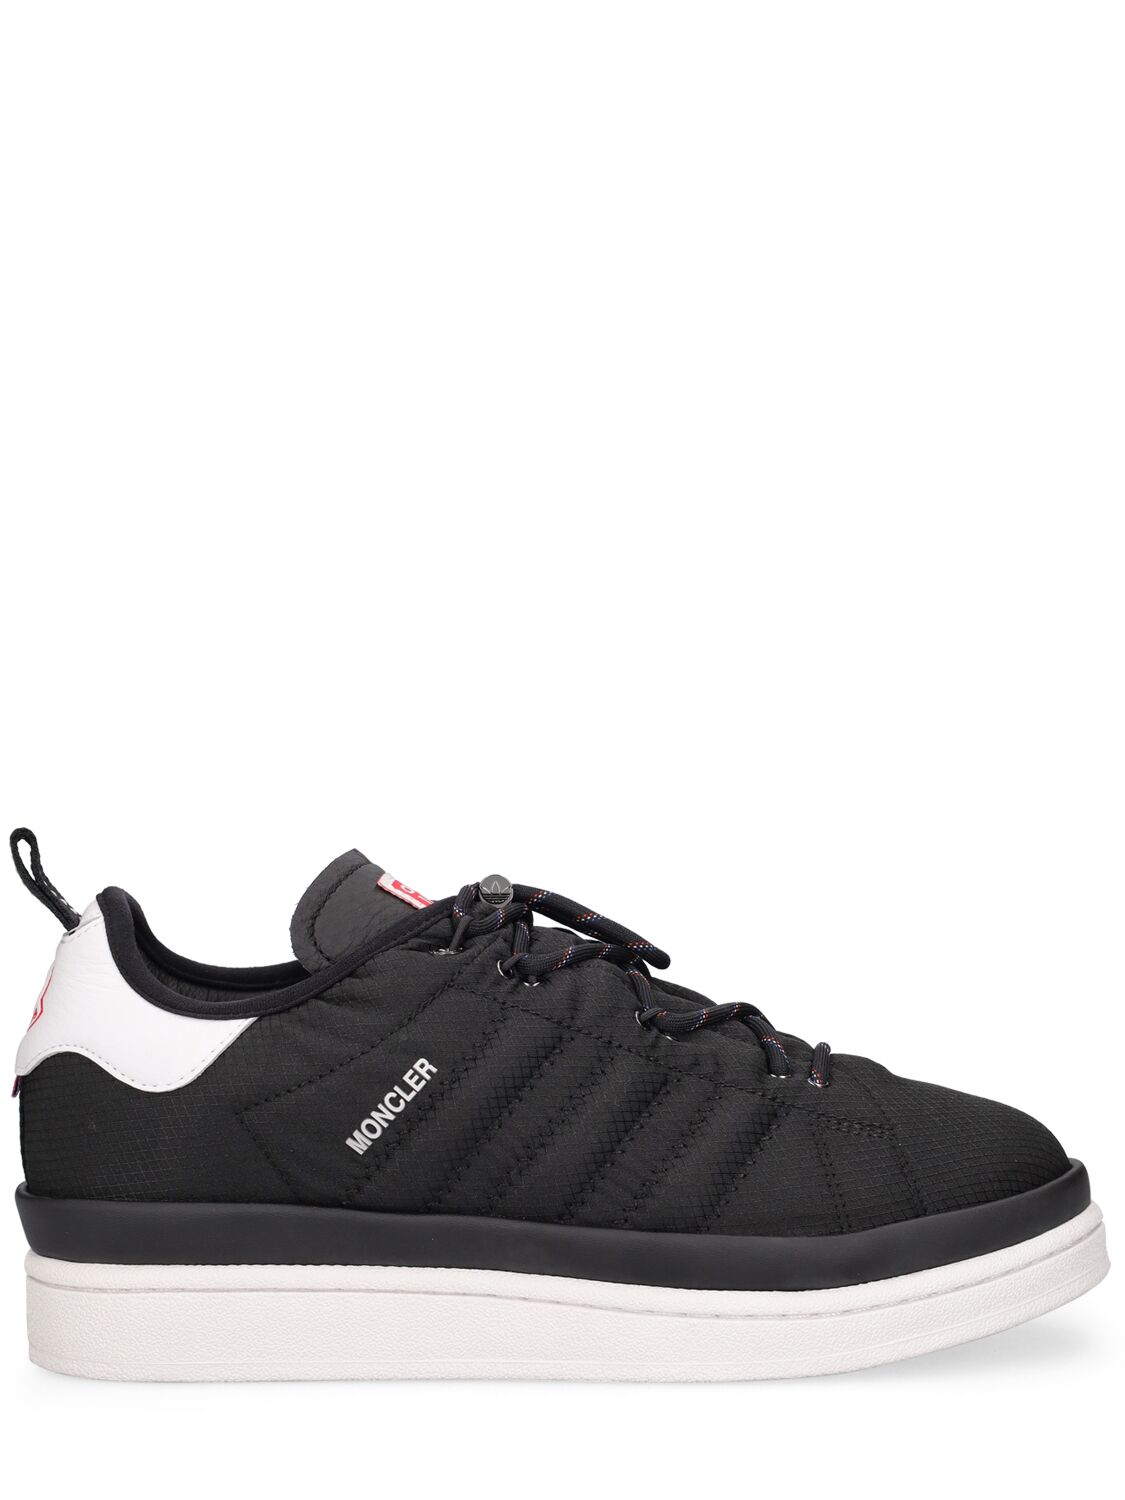 Shop Moncler Genius Moncler X Adidas Campus Leather Sneakers In Black